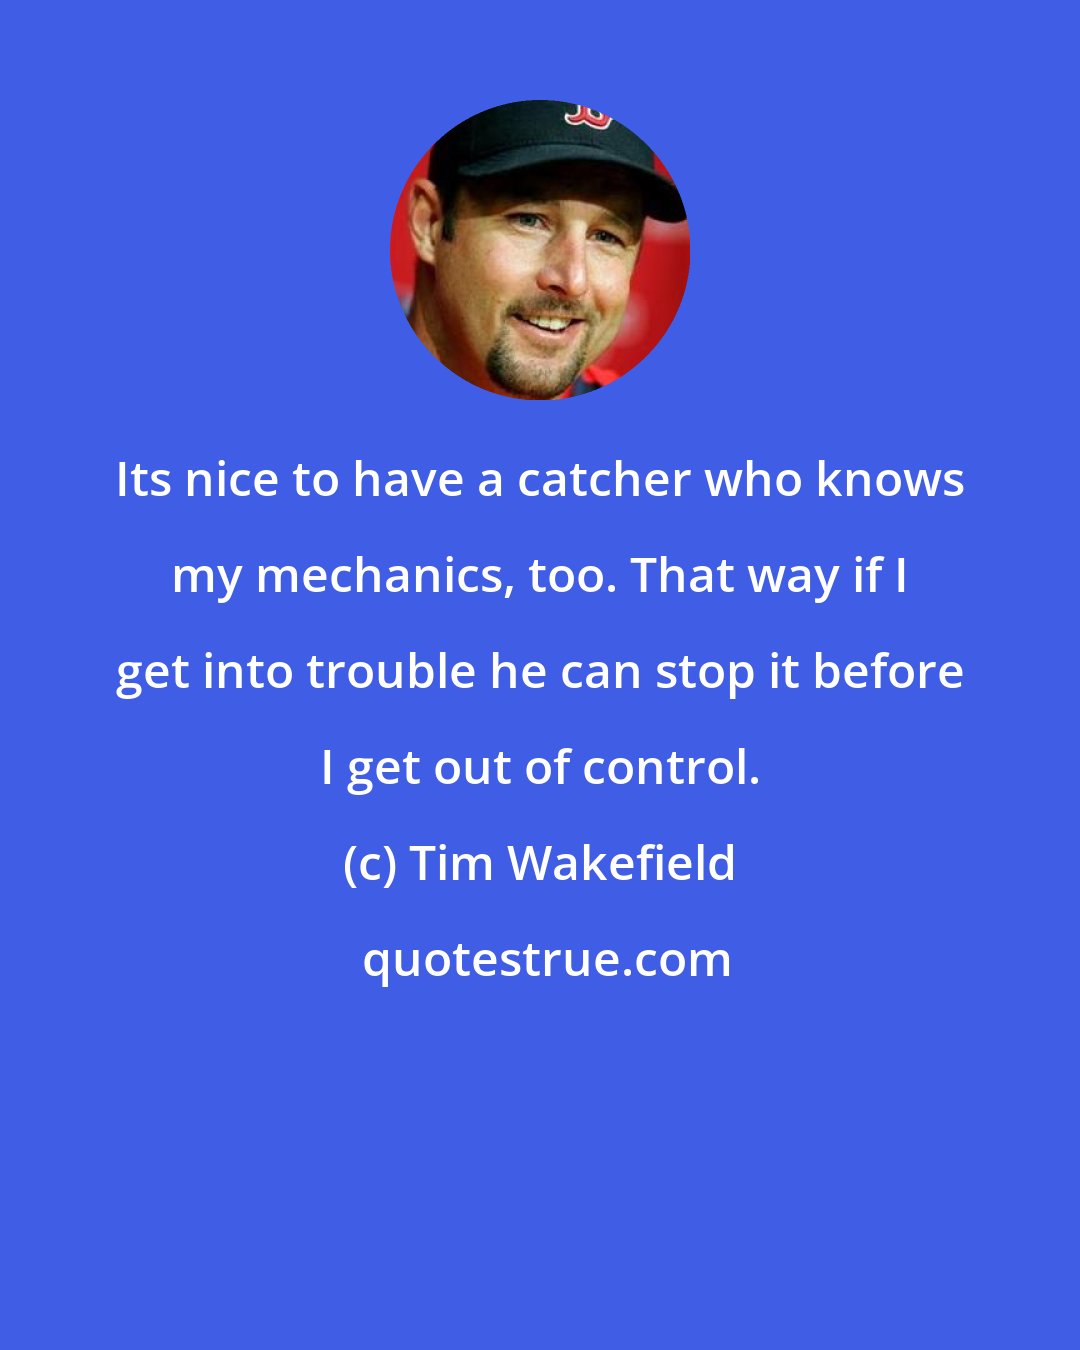 Tim Wakefield: Its nice to have a catcher who knows my mechanics, too. That way if I get into trouble he can stop it before I get out of control.